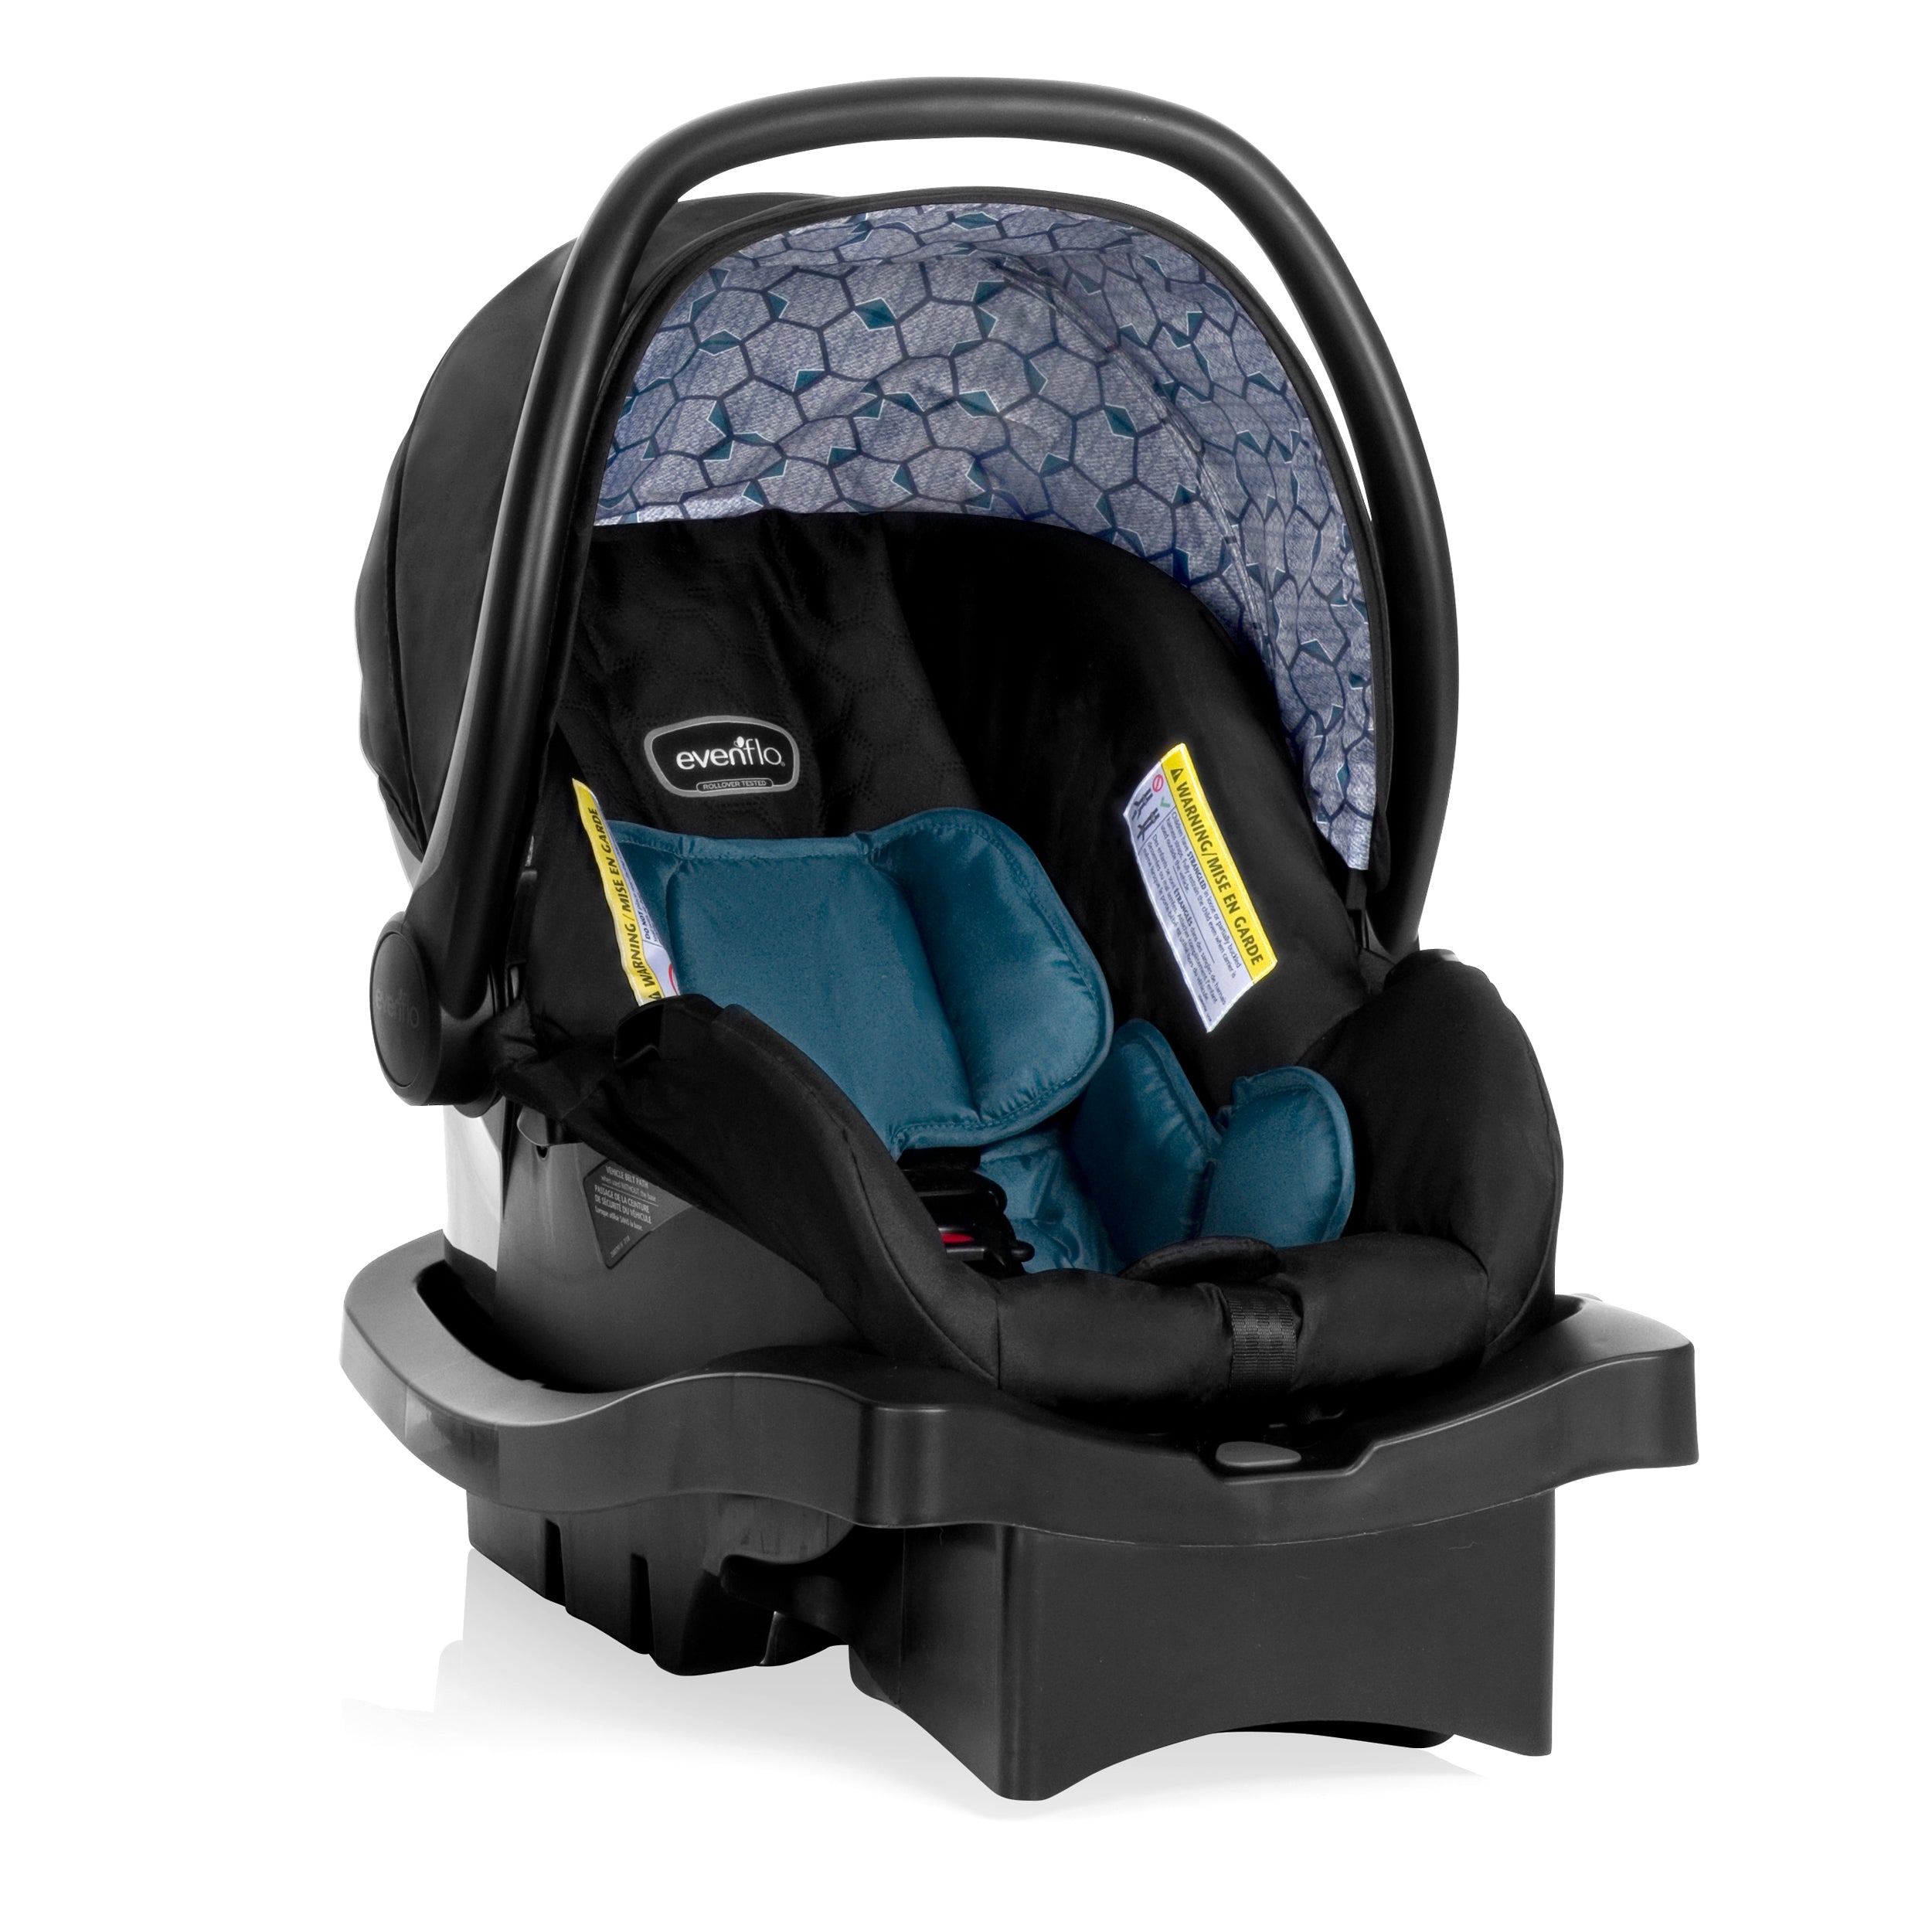 Clover Travel System with LiteMax Infant Car Seat Evenflo® Official Site  – Evenflo® Company, Inc